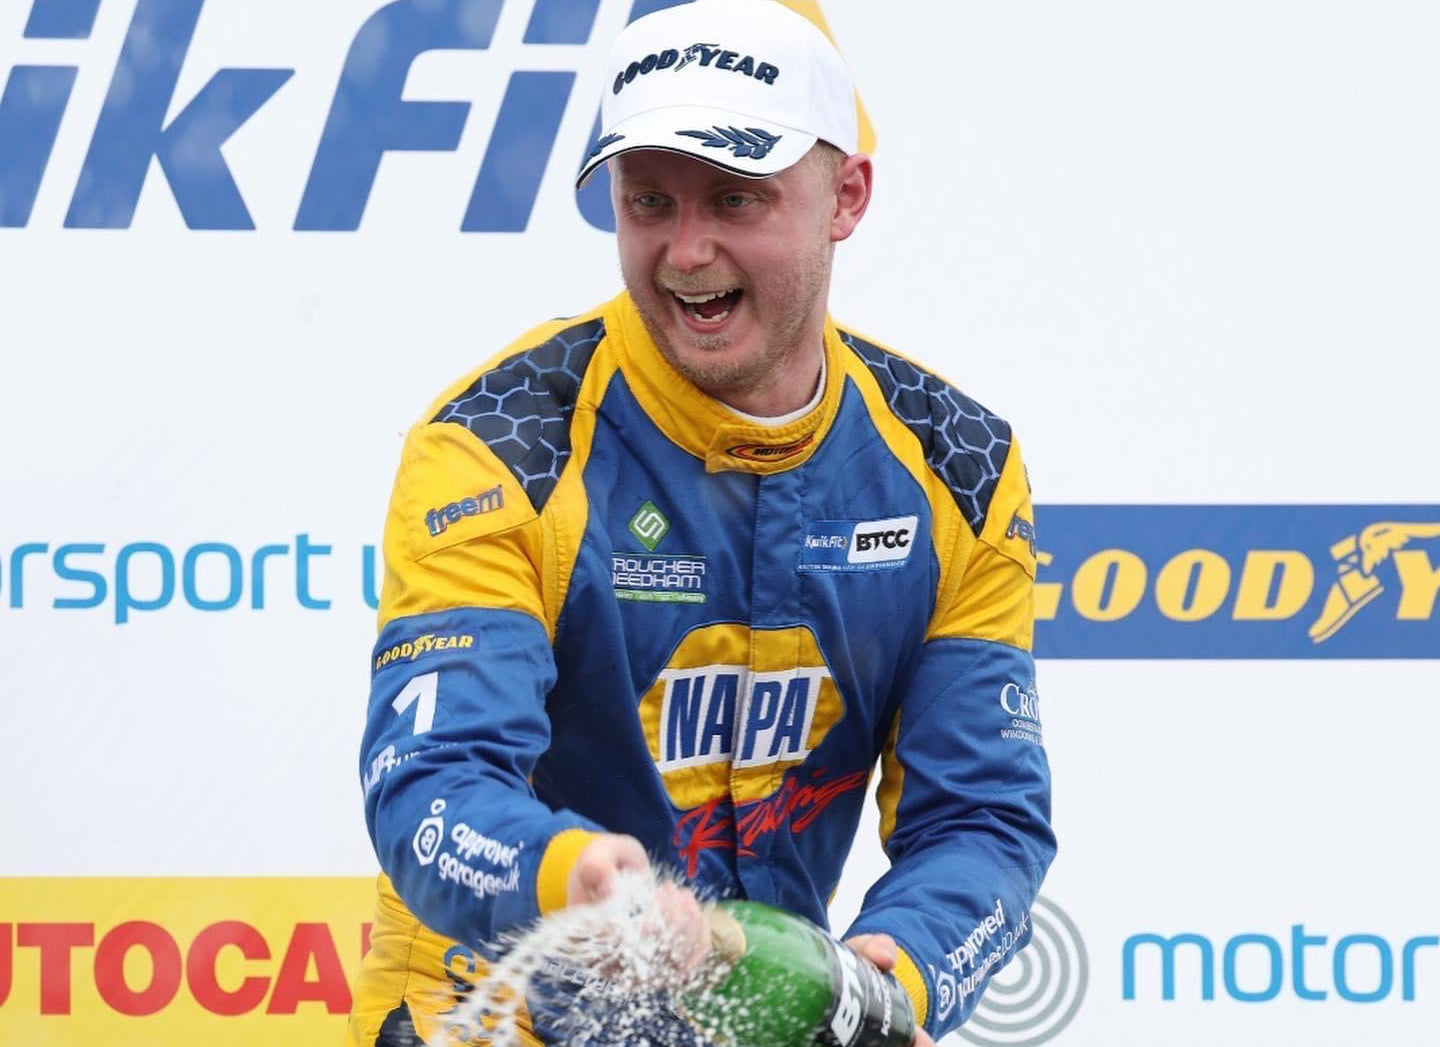 FIRST BTCC WIN FOR NAPA RACING UK AFTER SPECTACULAR KNOCKHILL DRIVE FROM SUTTON